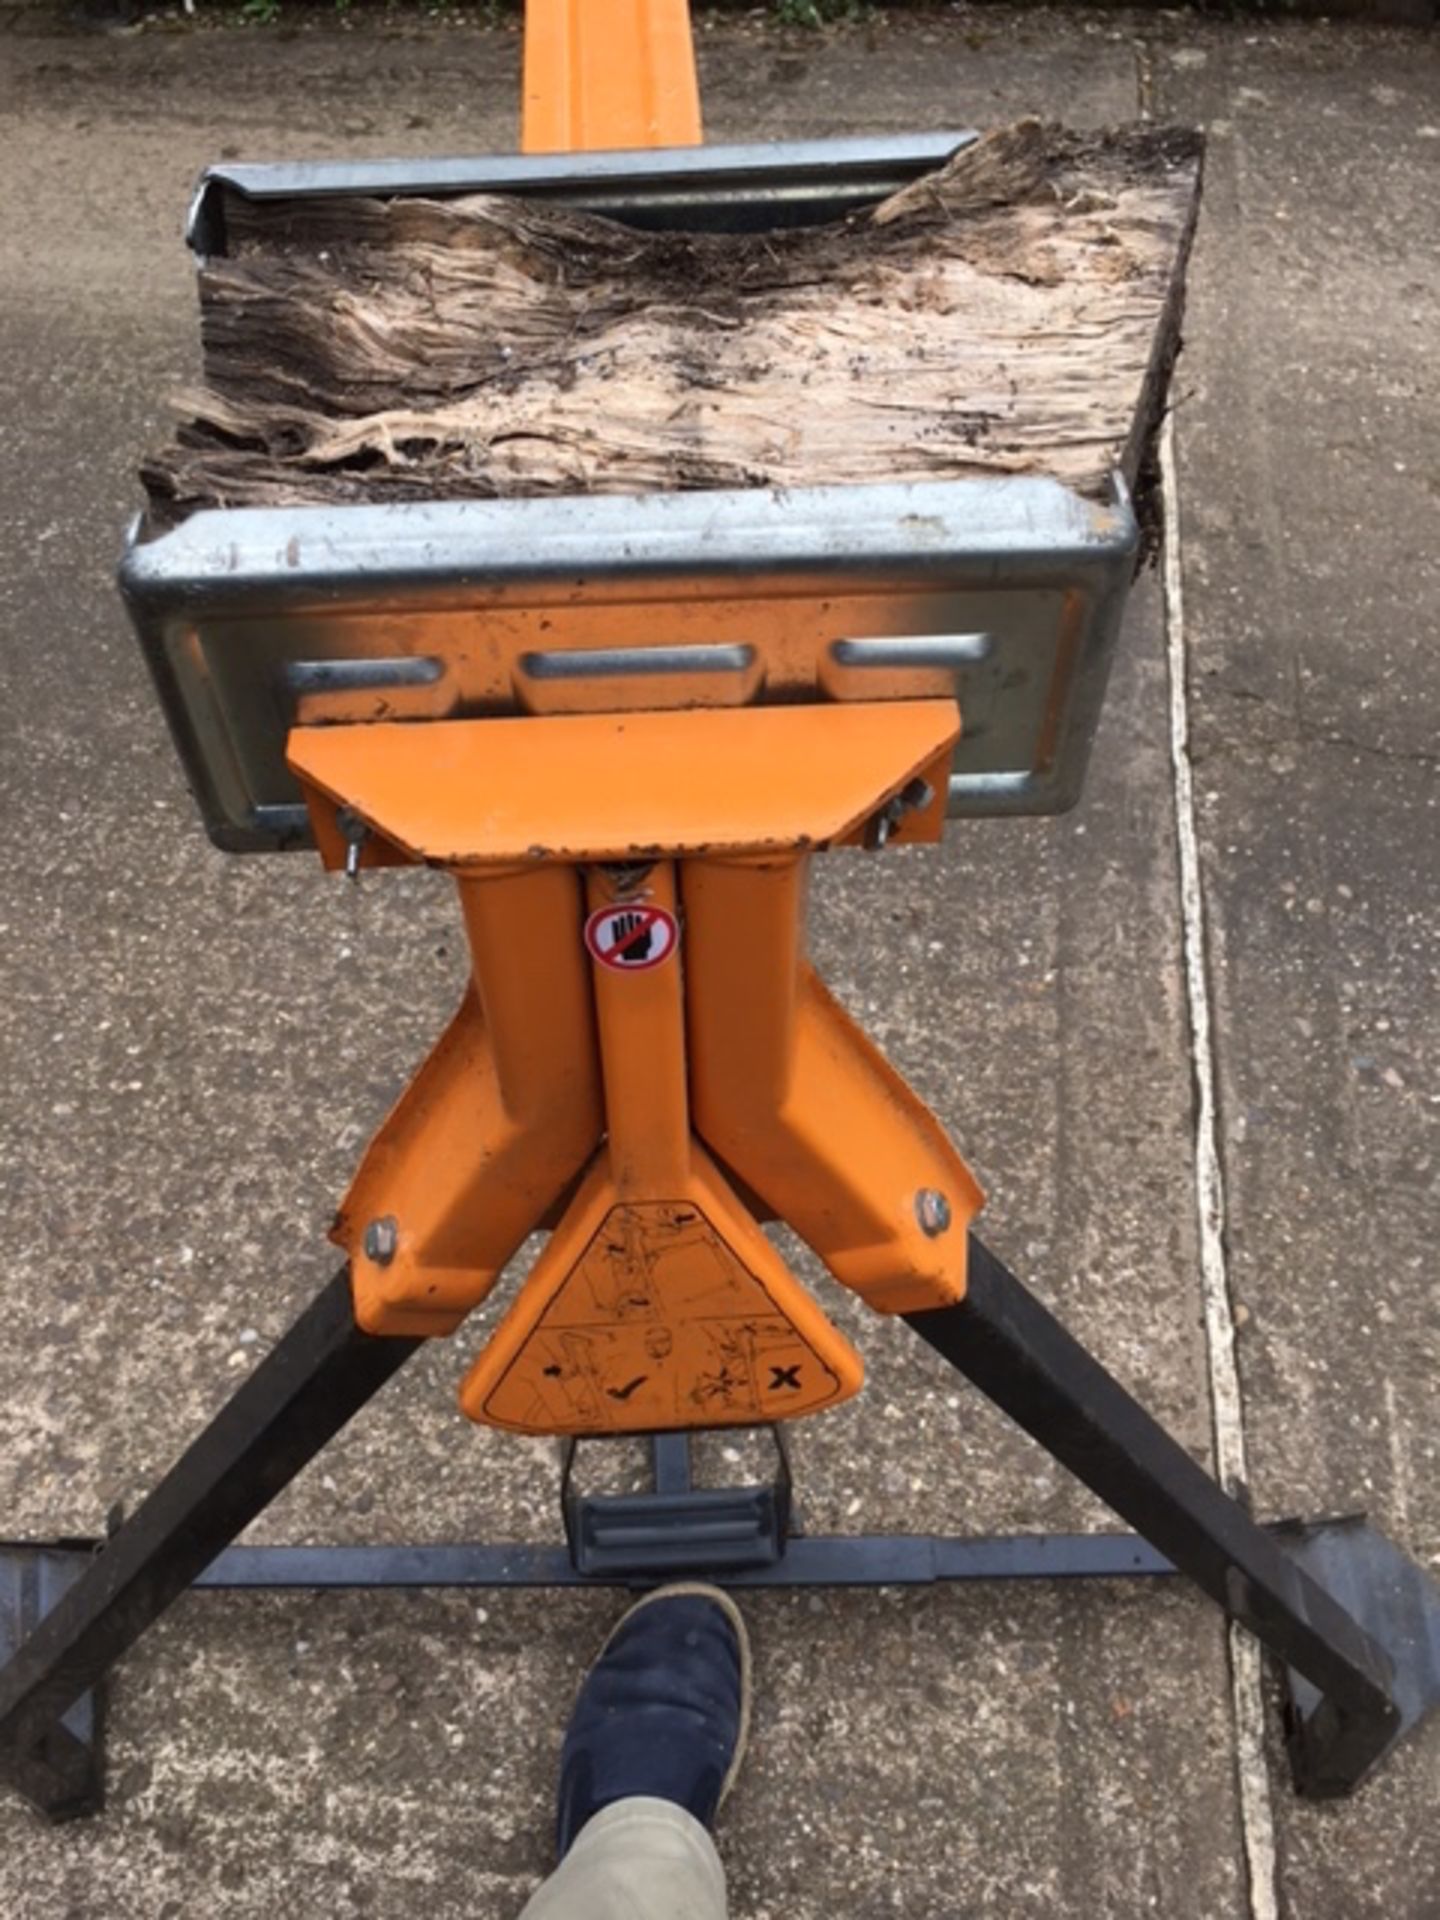 Folding Log stand with clamp jaws, Heavy duty, Tripod support legs. Folds down for storage, holds